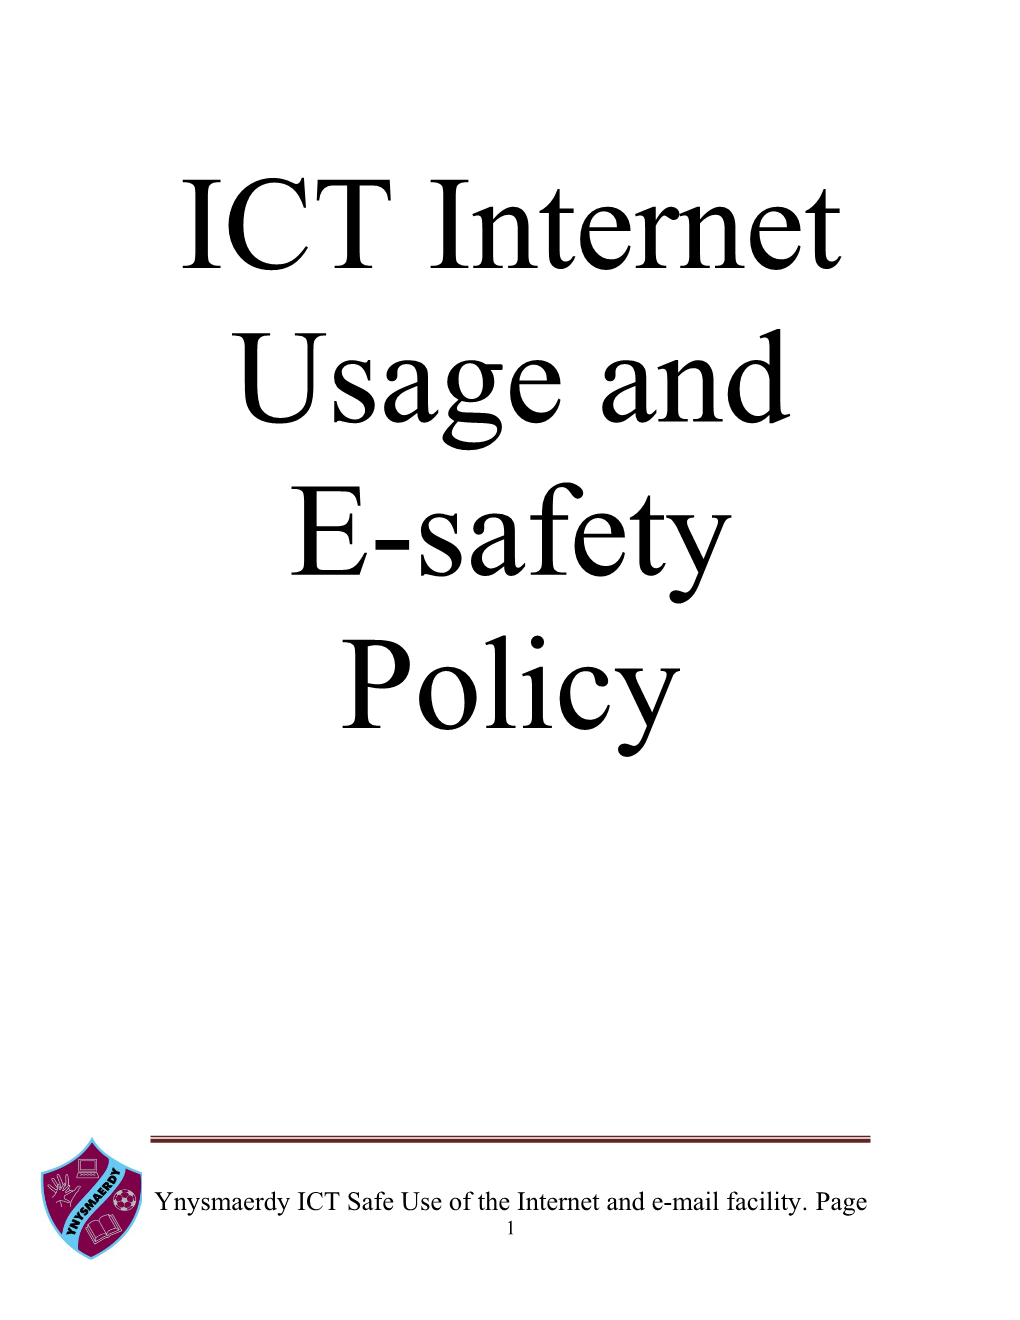 ICT Internet Usage And